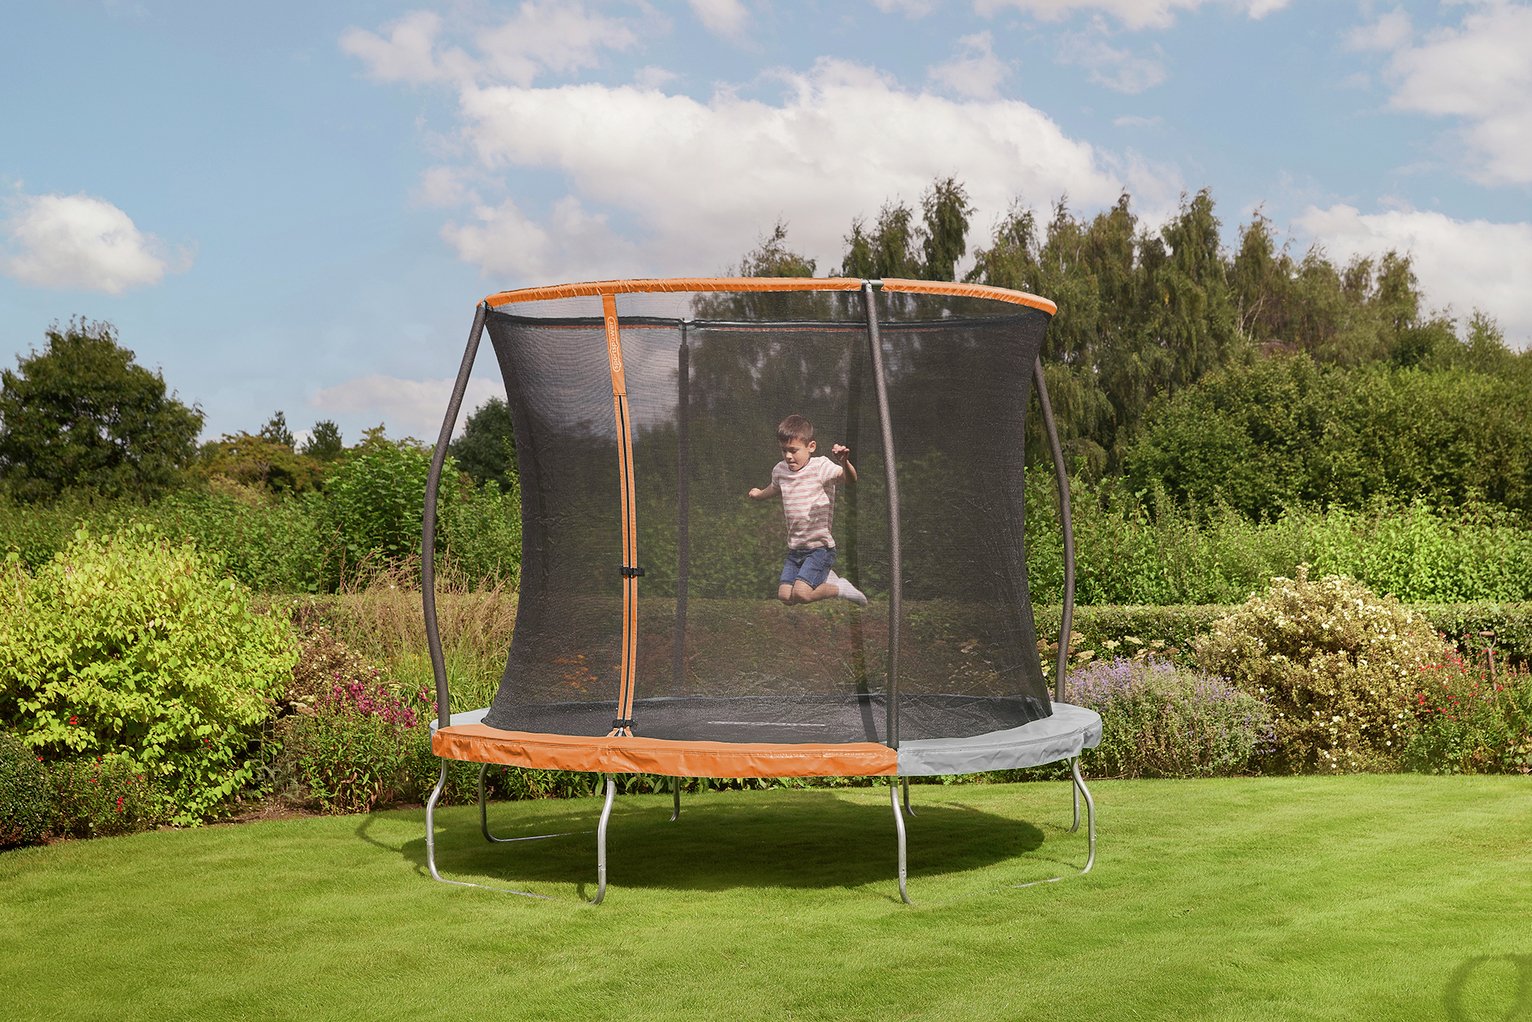 Sportspower 8ft Outdoor Kids Trampoline with Enclosure Review